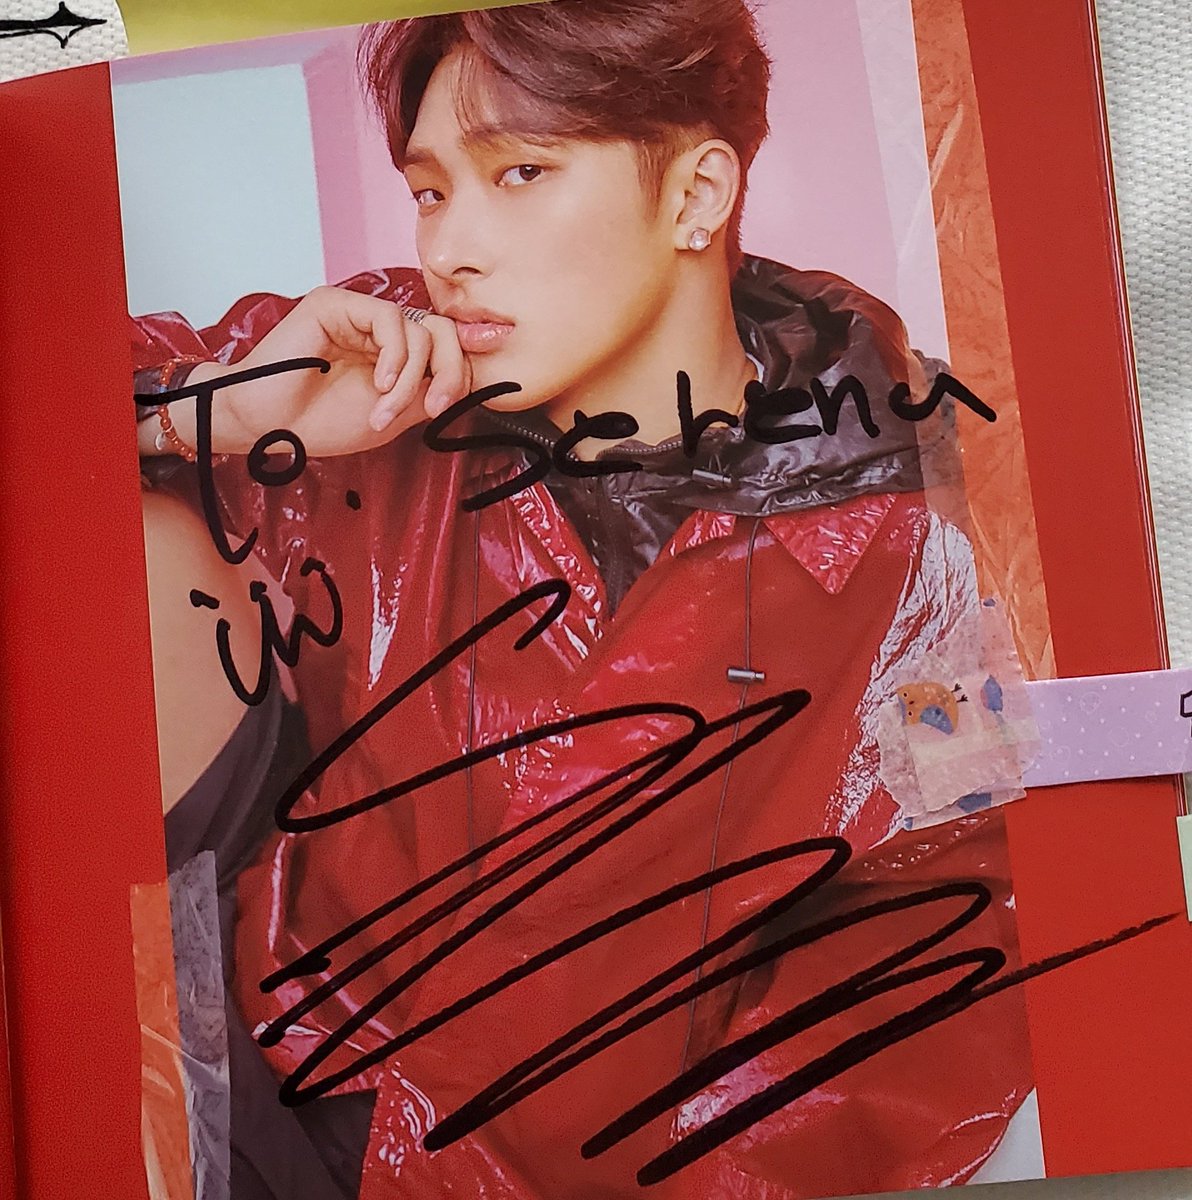 190808 ATEEZ fansign in Melbourne 》 MingiQ: If you could have anything for your birthday what would you want?A: Serena Love!! (Lol he messed up the a but it's okay )So cringe but he's cute. #ATEEZ  #ATEEZGLOBALFANSIGN  #ATEEZinMELBOURNE  #에이티즈  #민기  #송민기